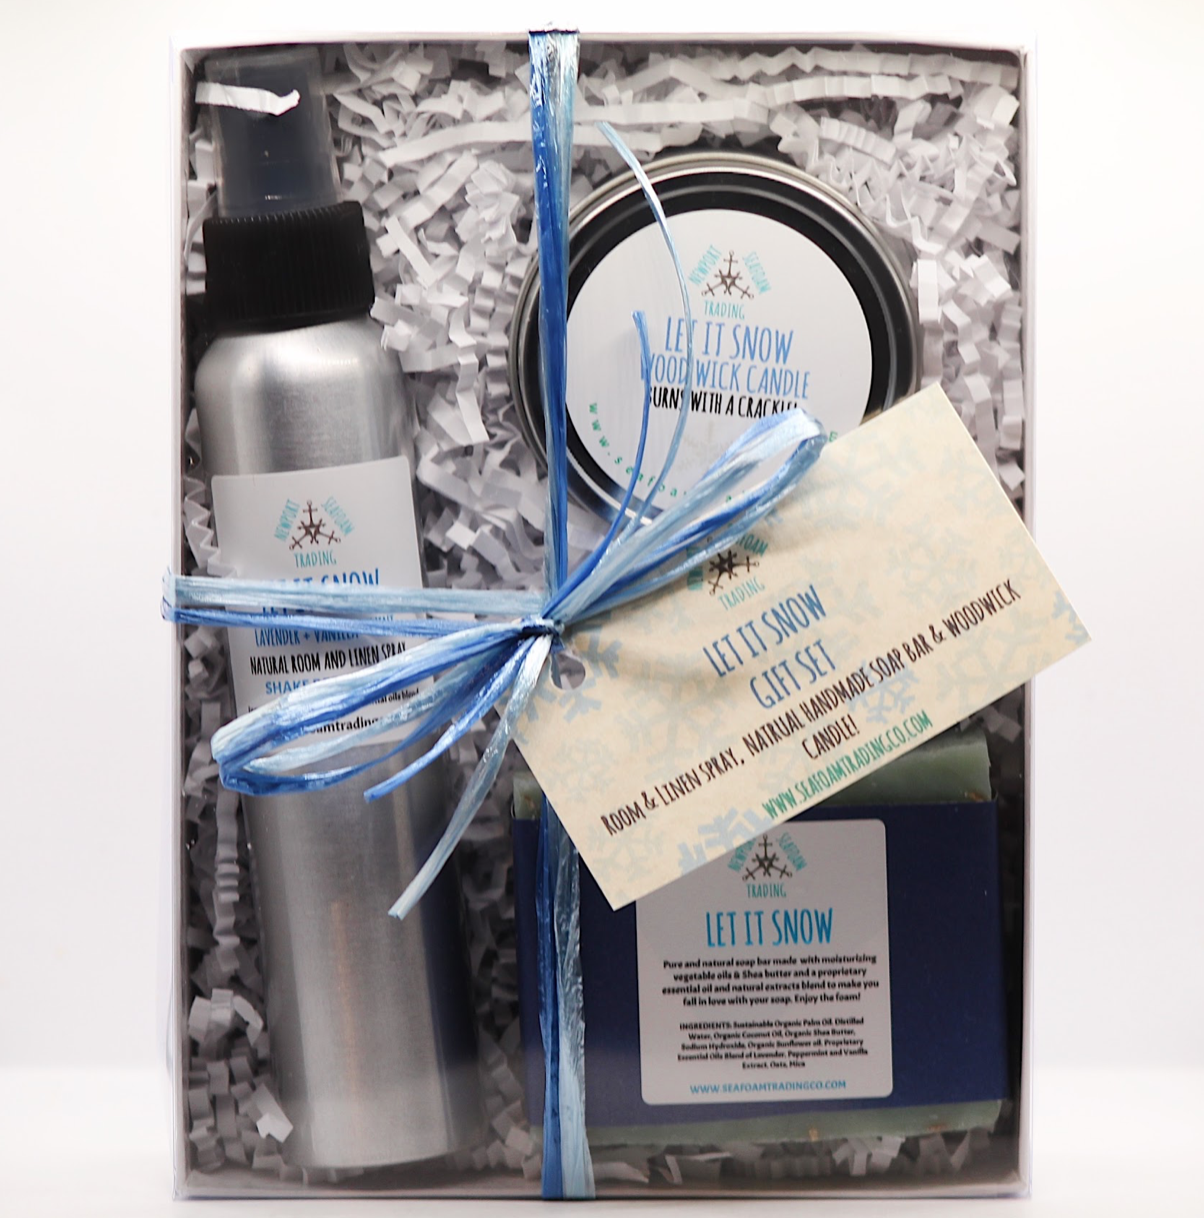 Let It Snow Home Aromatherapy Gift Set.